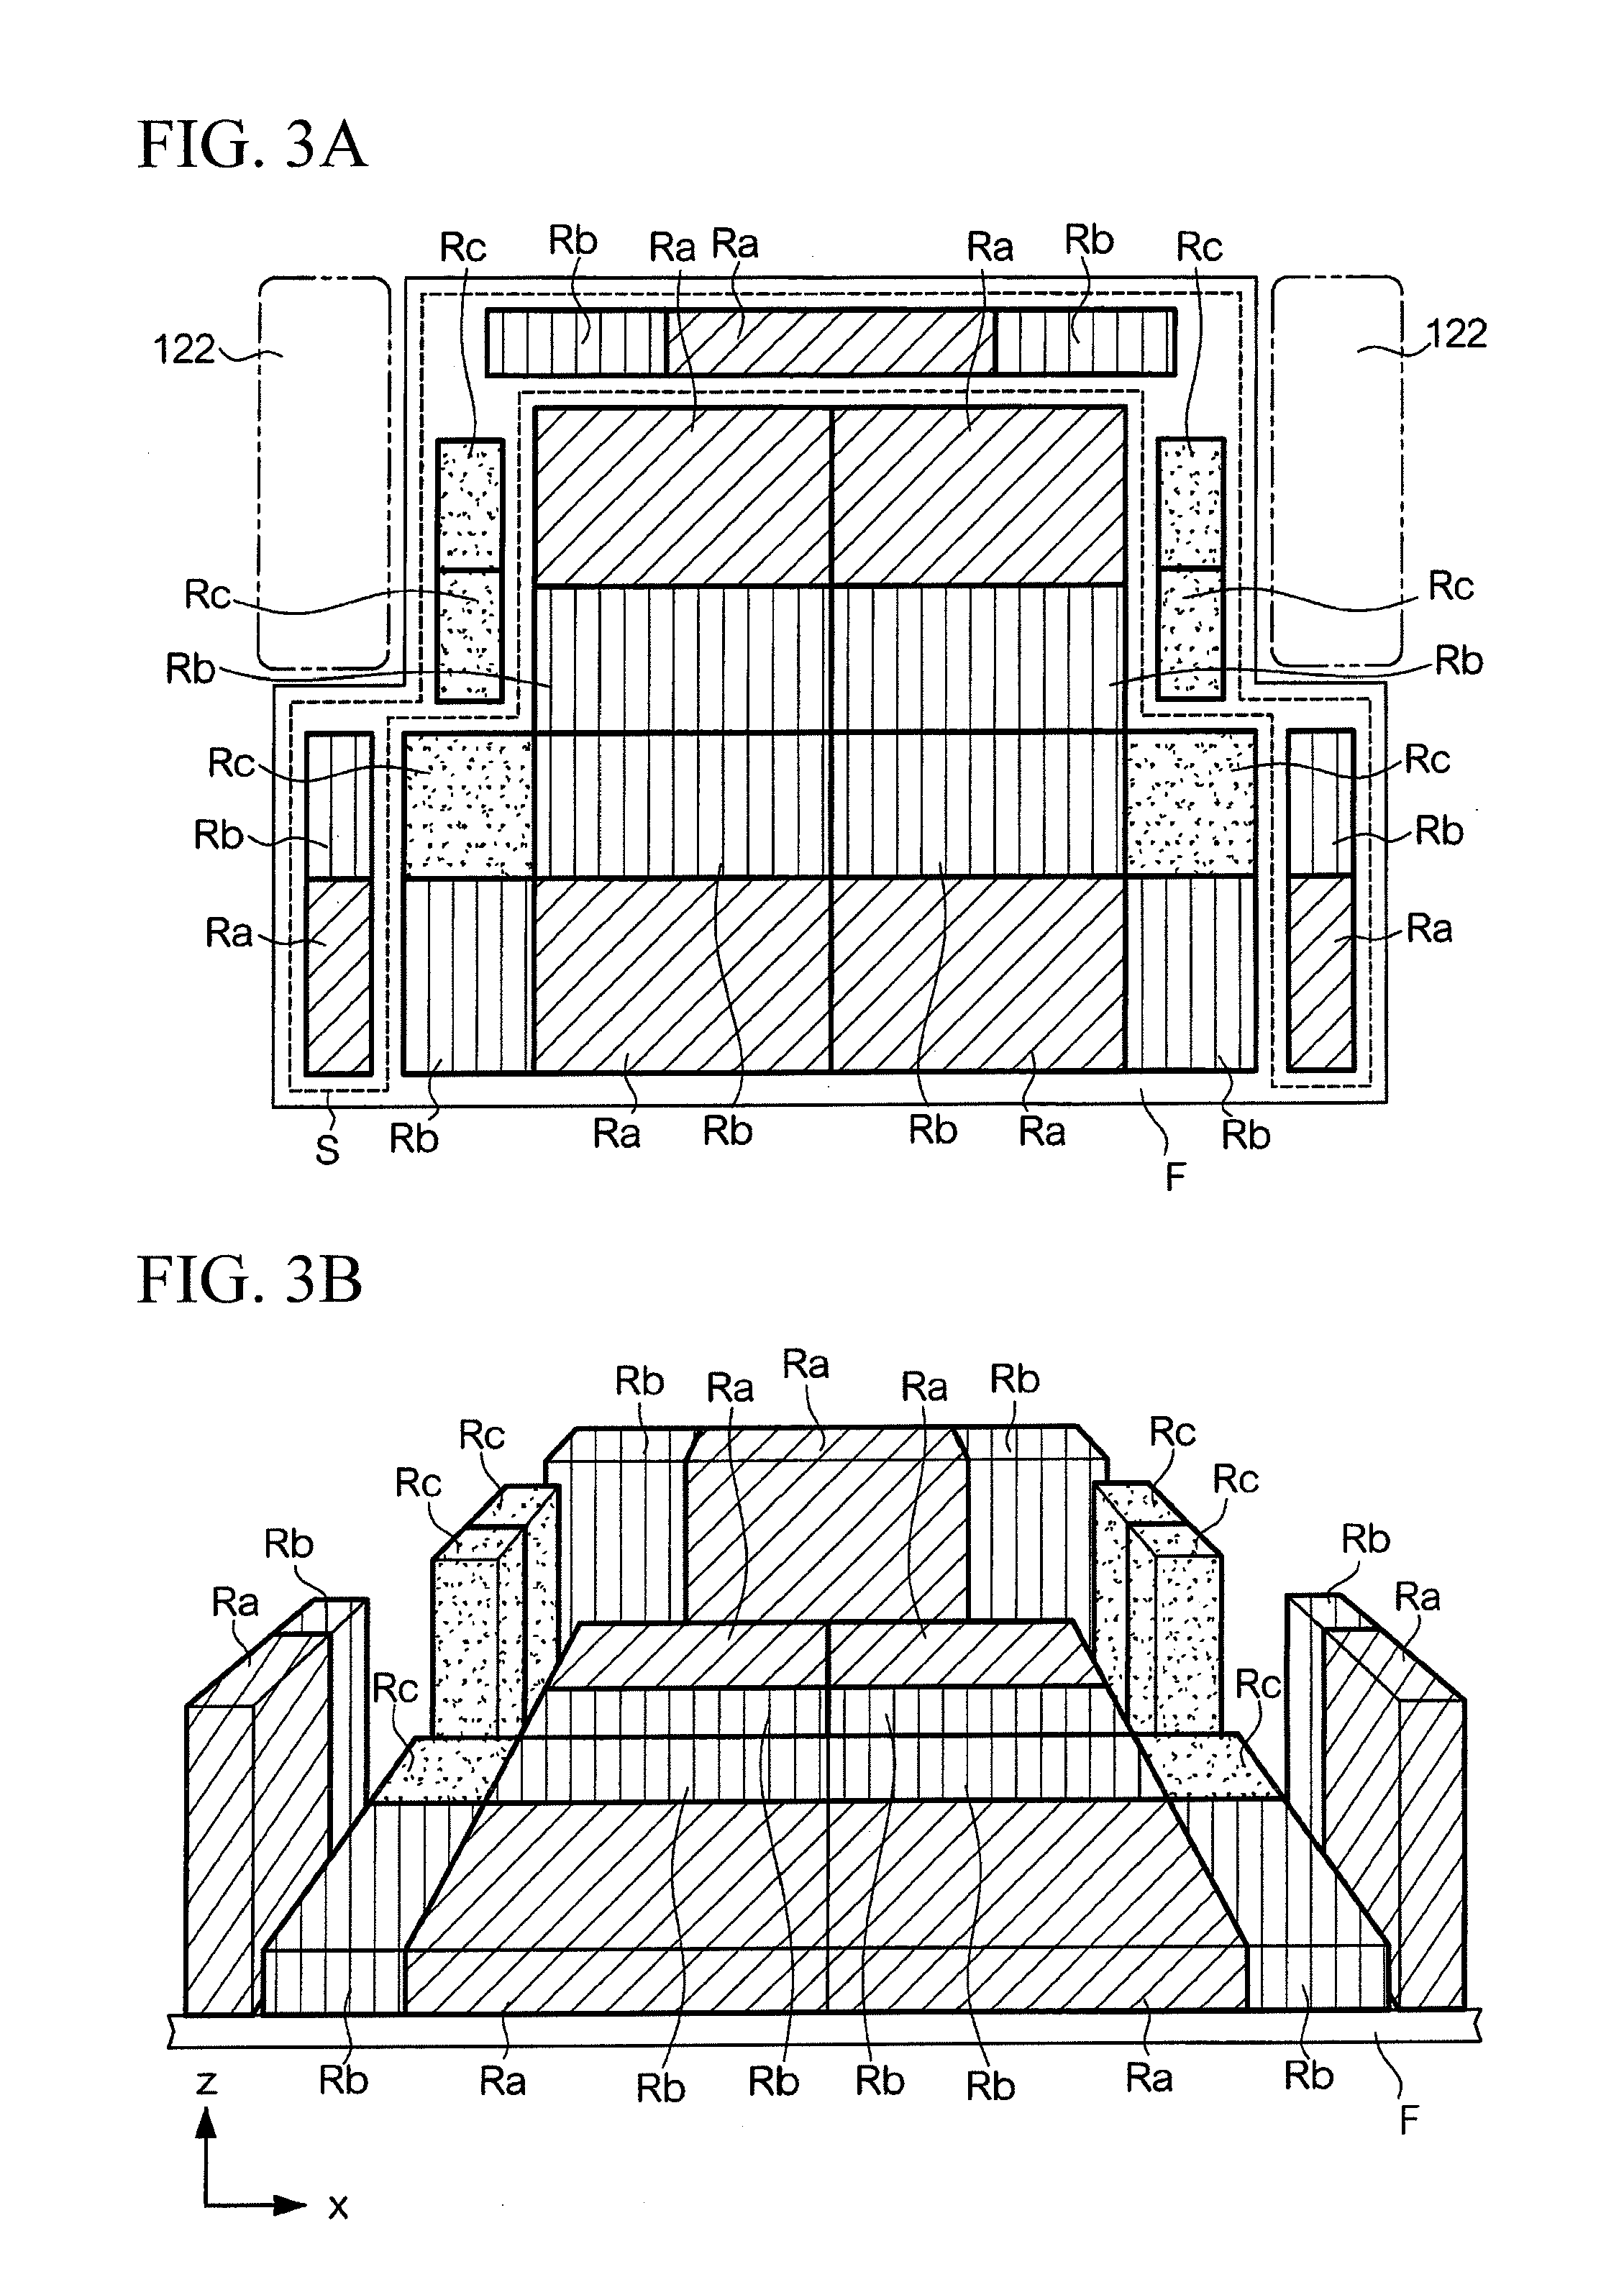 Sound absorbing structure built into luggage compartment of vehicle